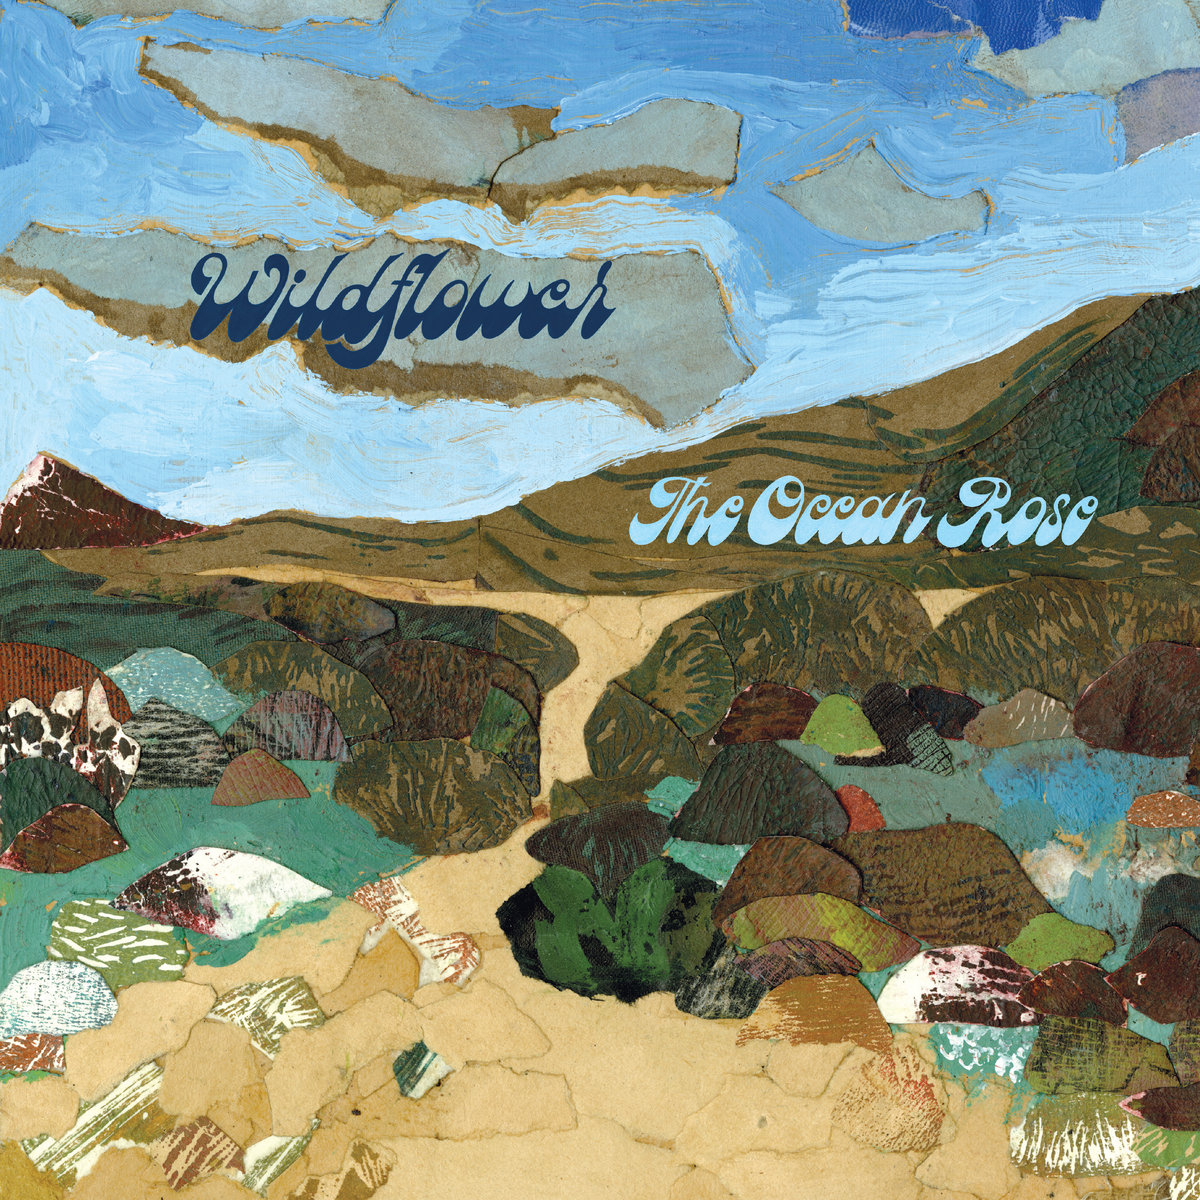 wildflower the ocean rose album cover - a collage of a beach scene with rock pools and distant hills